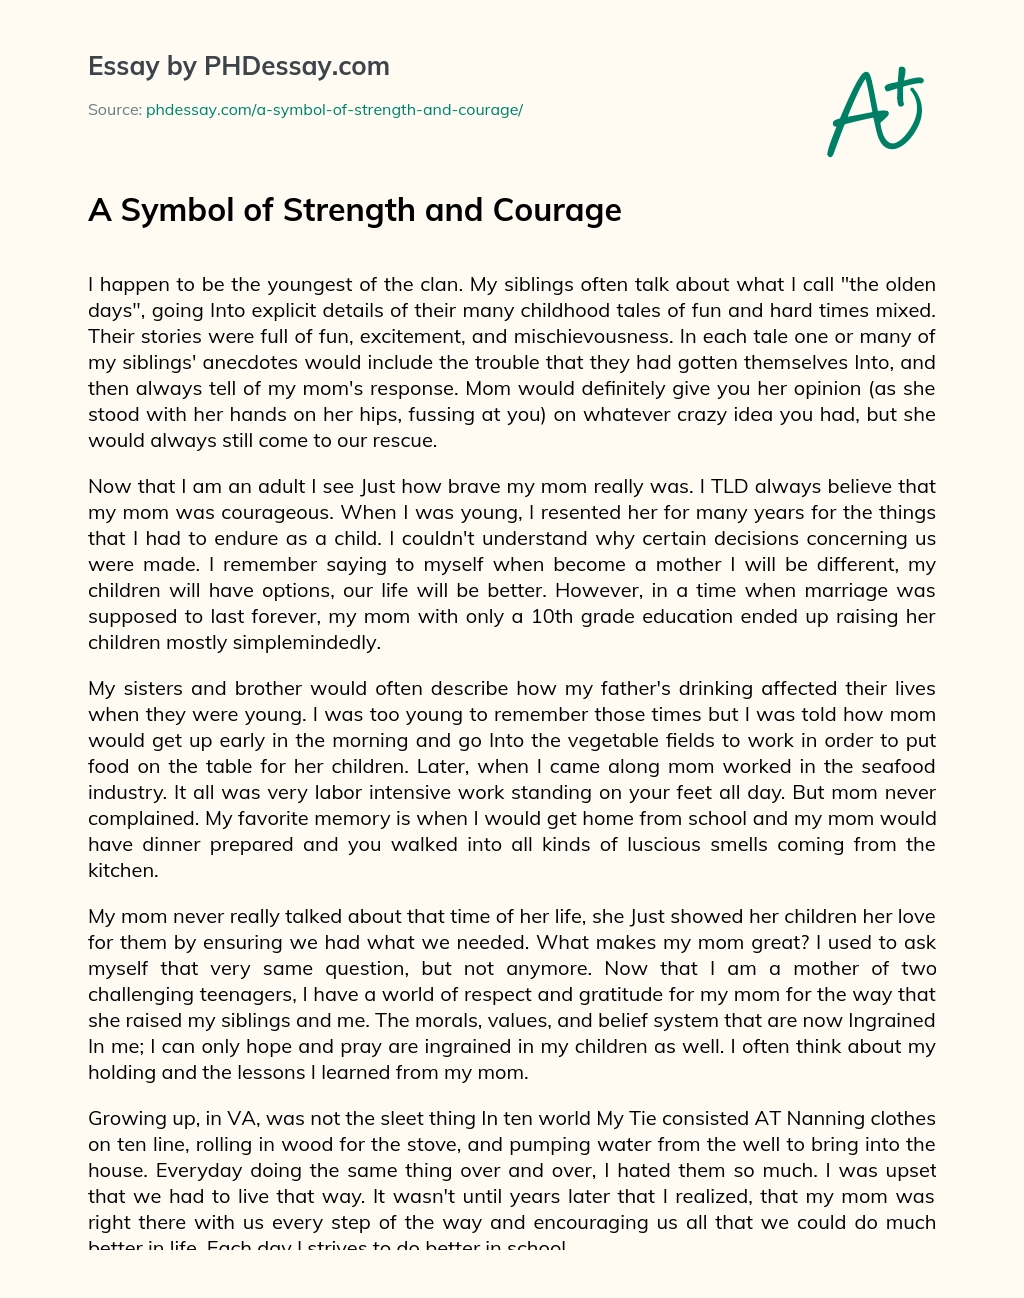 A Symbol of Strength and Courage essay